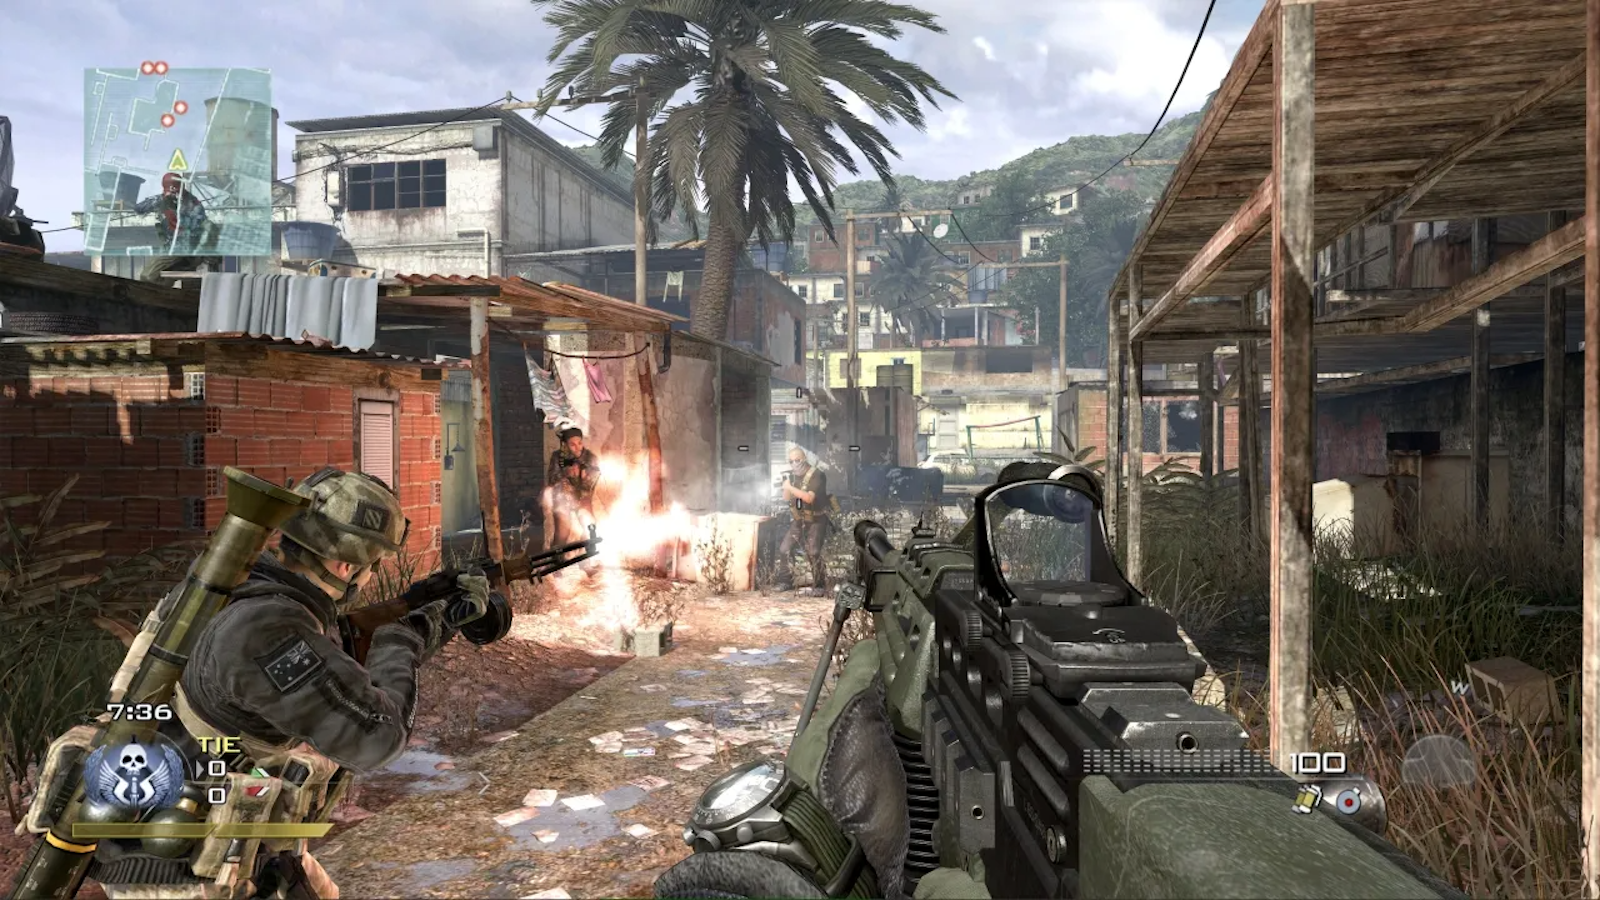 A character fires a weapon alongside an ally down a pathway lined with buildings, with a Brazilian favela and mountain in the background in Call of Duty: Modern Warfare 2 (2009).